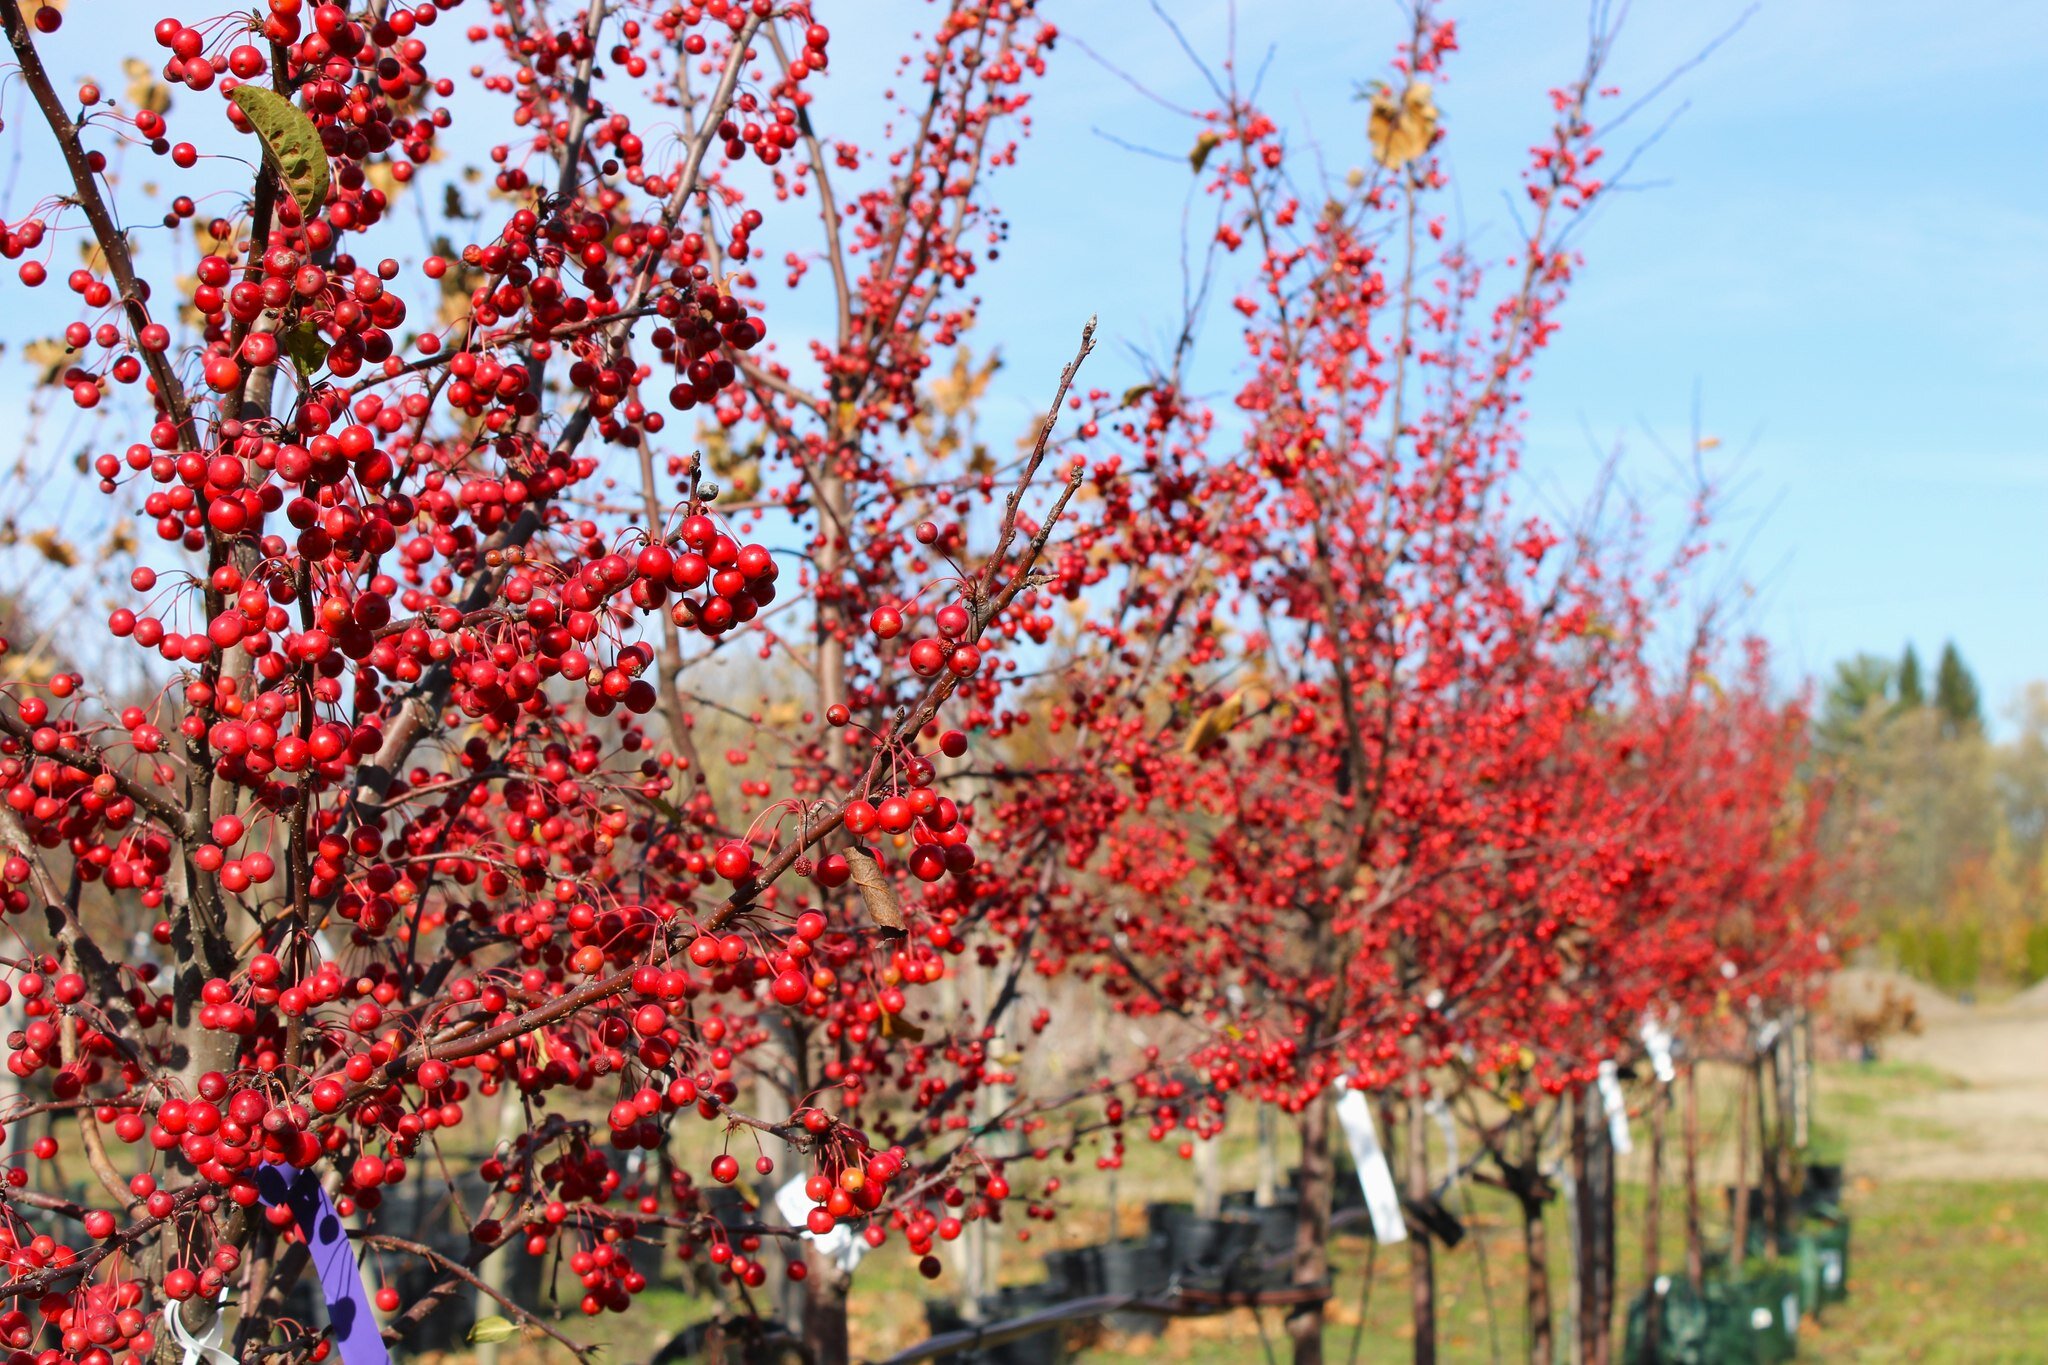 Fall is for planting trees! And if you're looking to add some festive color, the Sugar Tyme crabapple is a fantastic candidate! 🌲 
.
.
.
#localbusiness #horticulture #RichmondIN #ShopLocalRichmondIN #ThinkGreen #AutumnatRoseCity #WinteratRoseCity